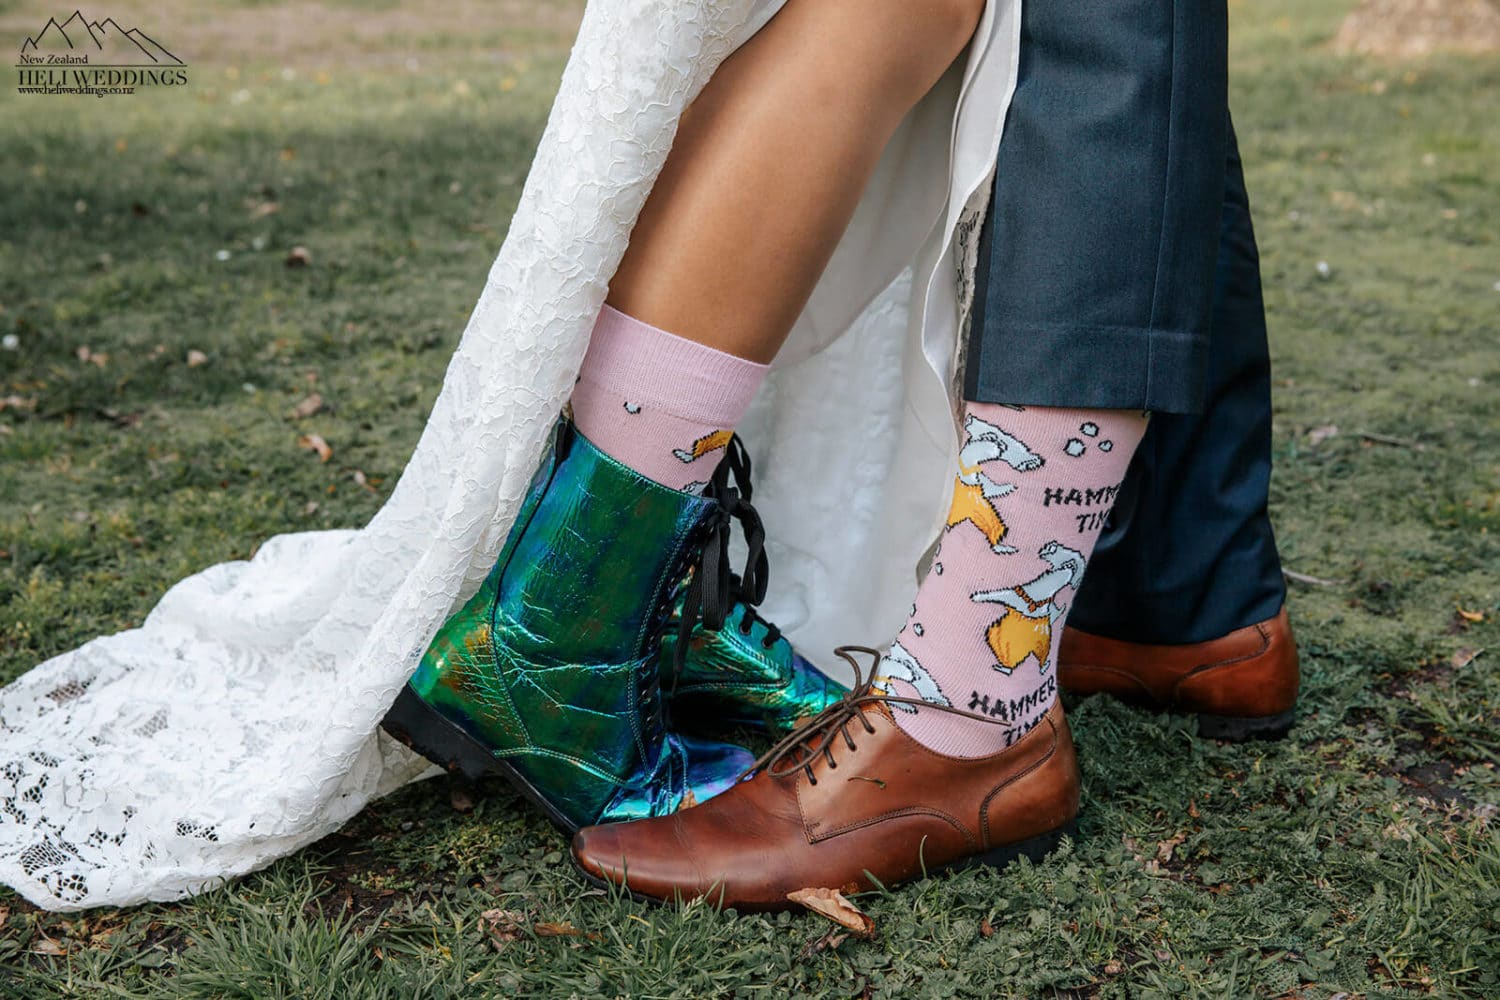 cool wedding shoes